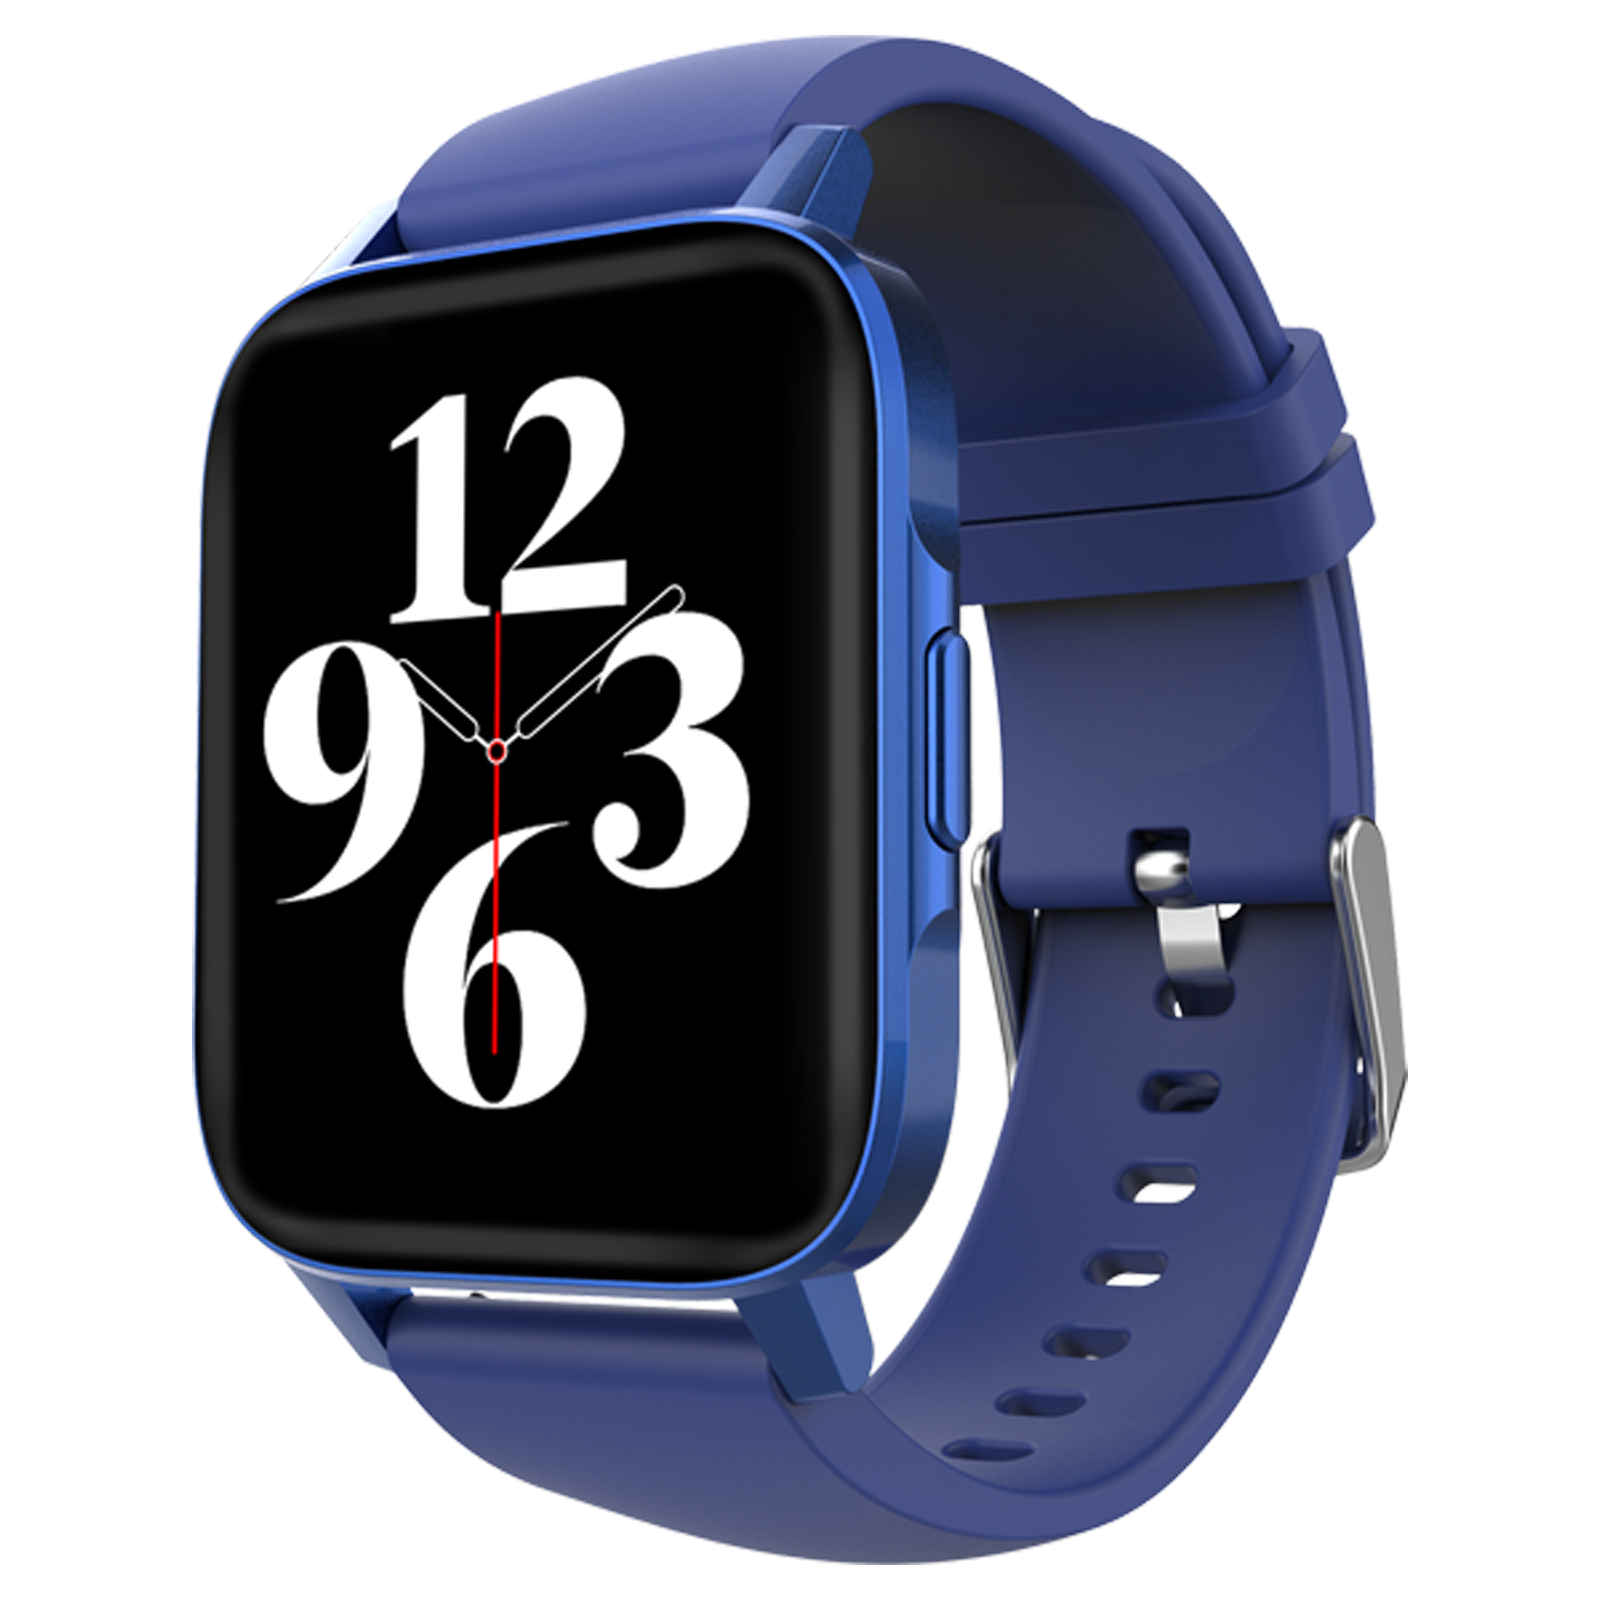 Buy TAGG Verve Neo Smart Watch (Bluetooth, 43mm) (15 Sports Mode, Blue ...